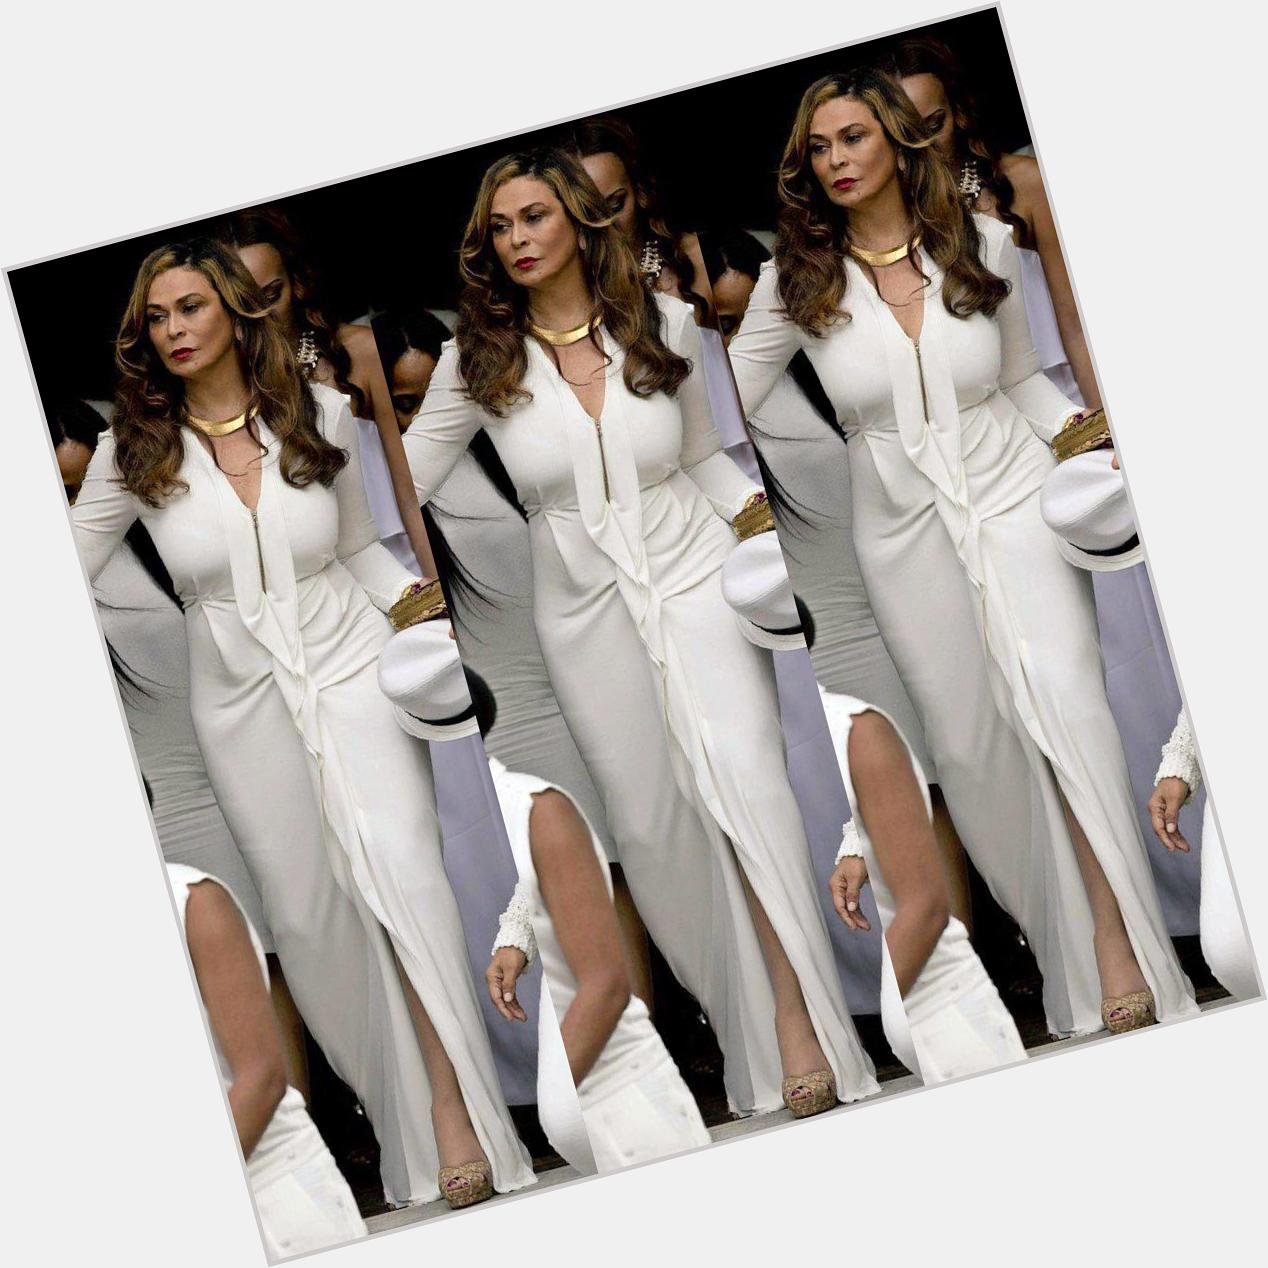 Happy Birthday to the beautiful and flawless Creole Queen creator of Beyoncé Giselle Knowles-Carter, Tina Knowles  